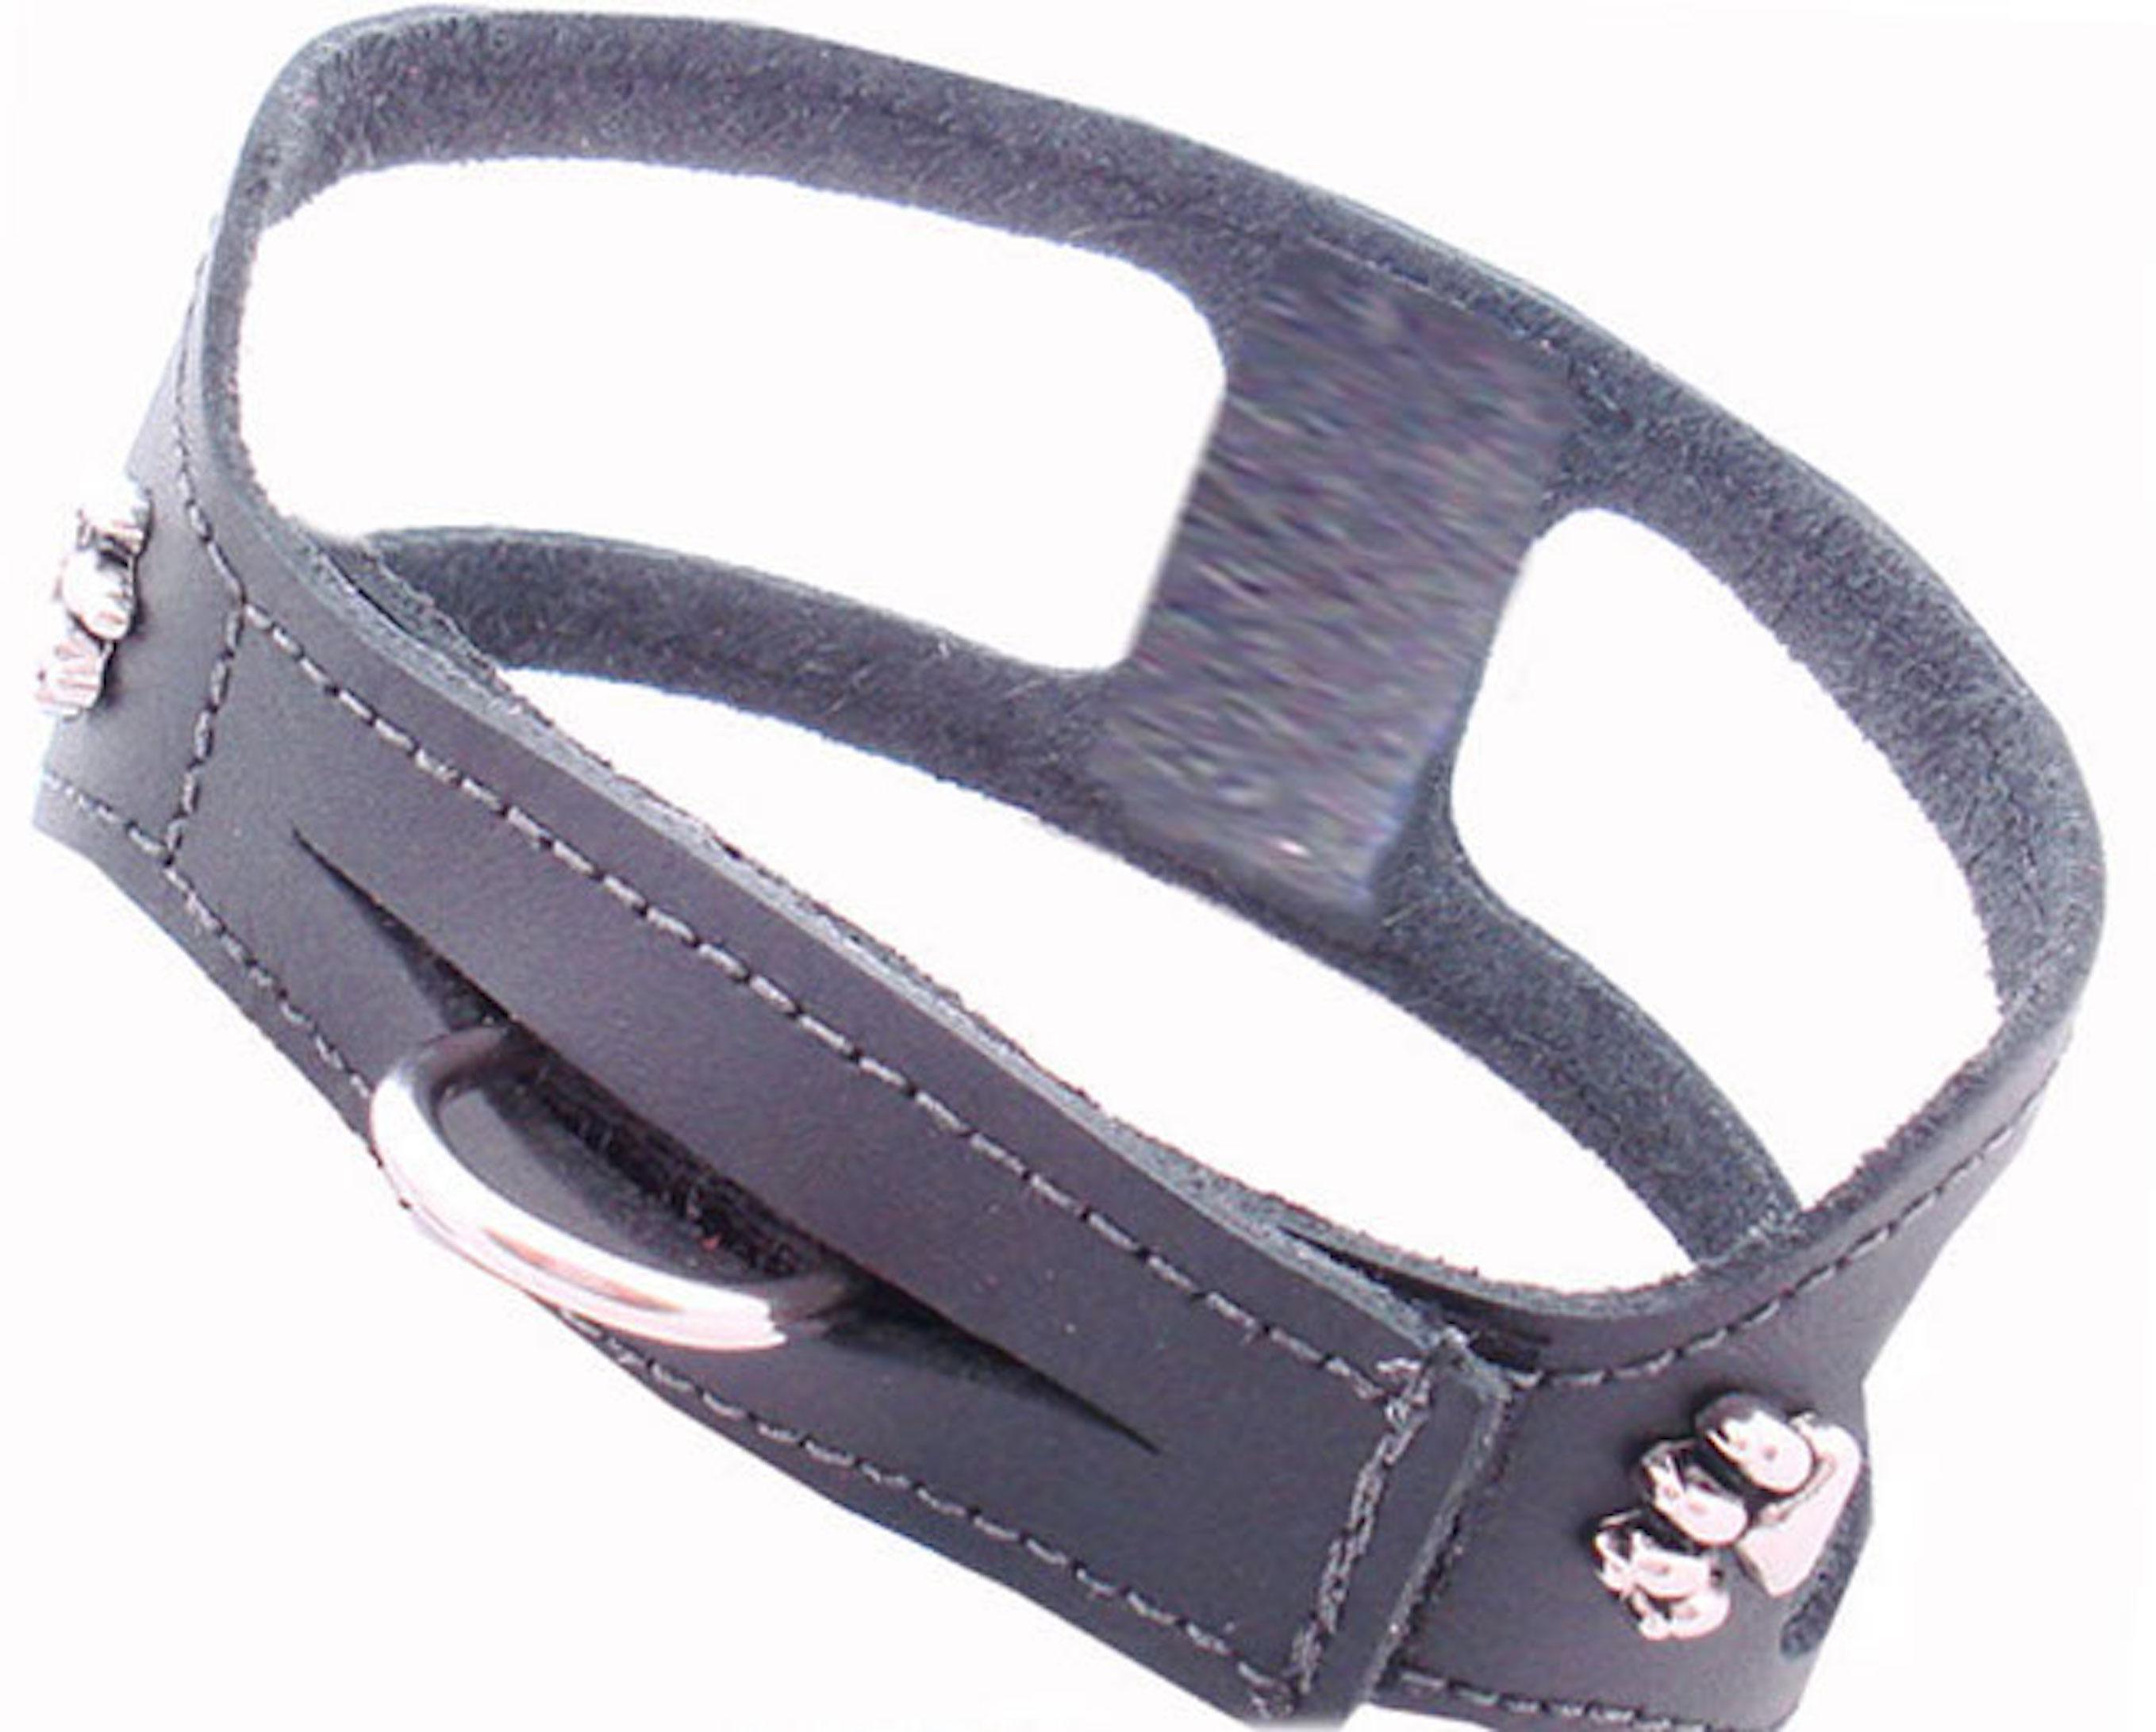 Choke Free Dog Harness for dogs under 15 lbs